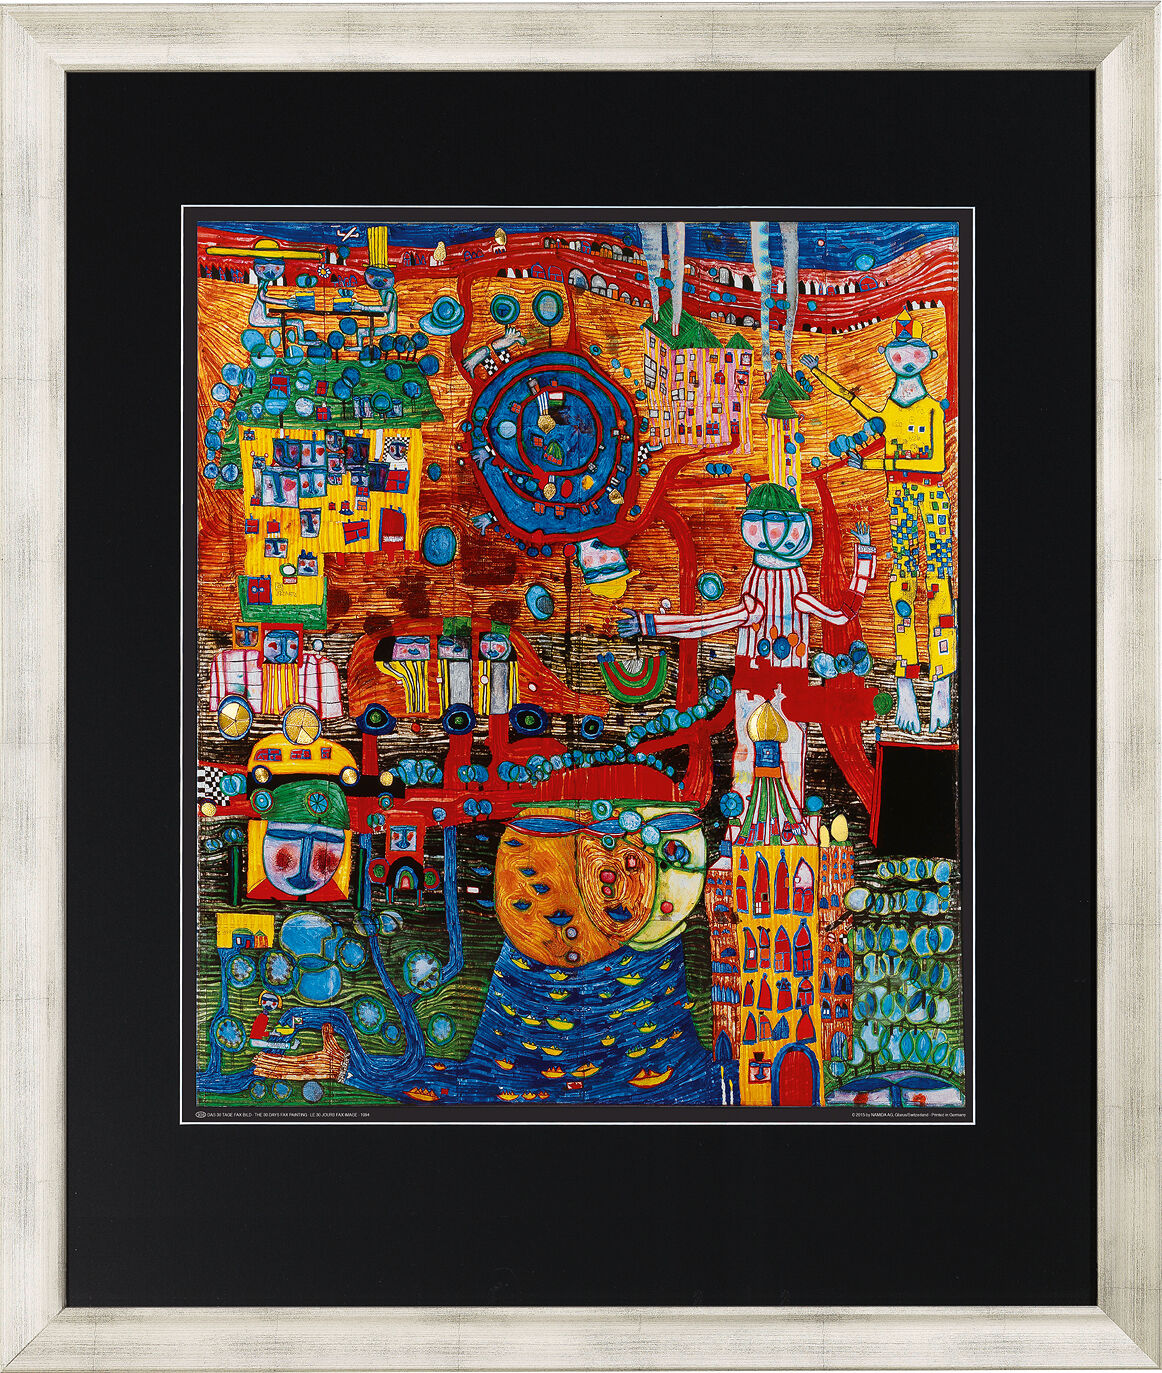 Picture "(936) The 30 Day Fax", framed by Friedensreich Hundertwasser